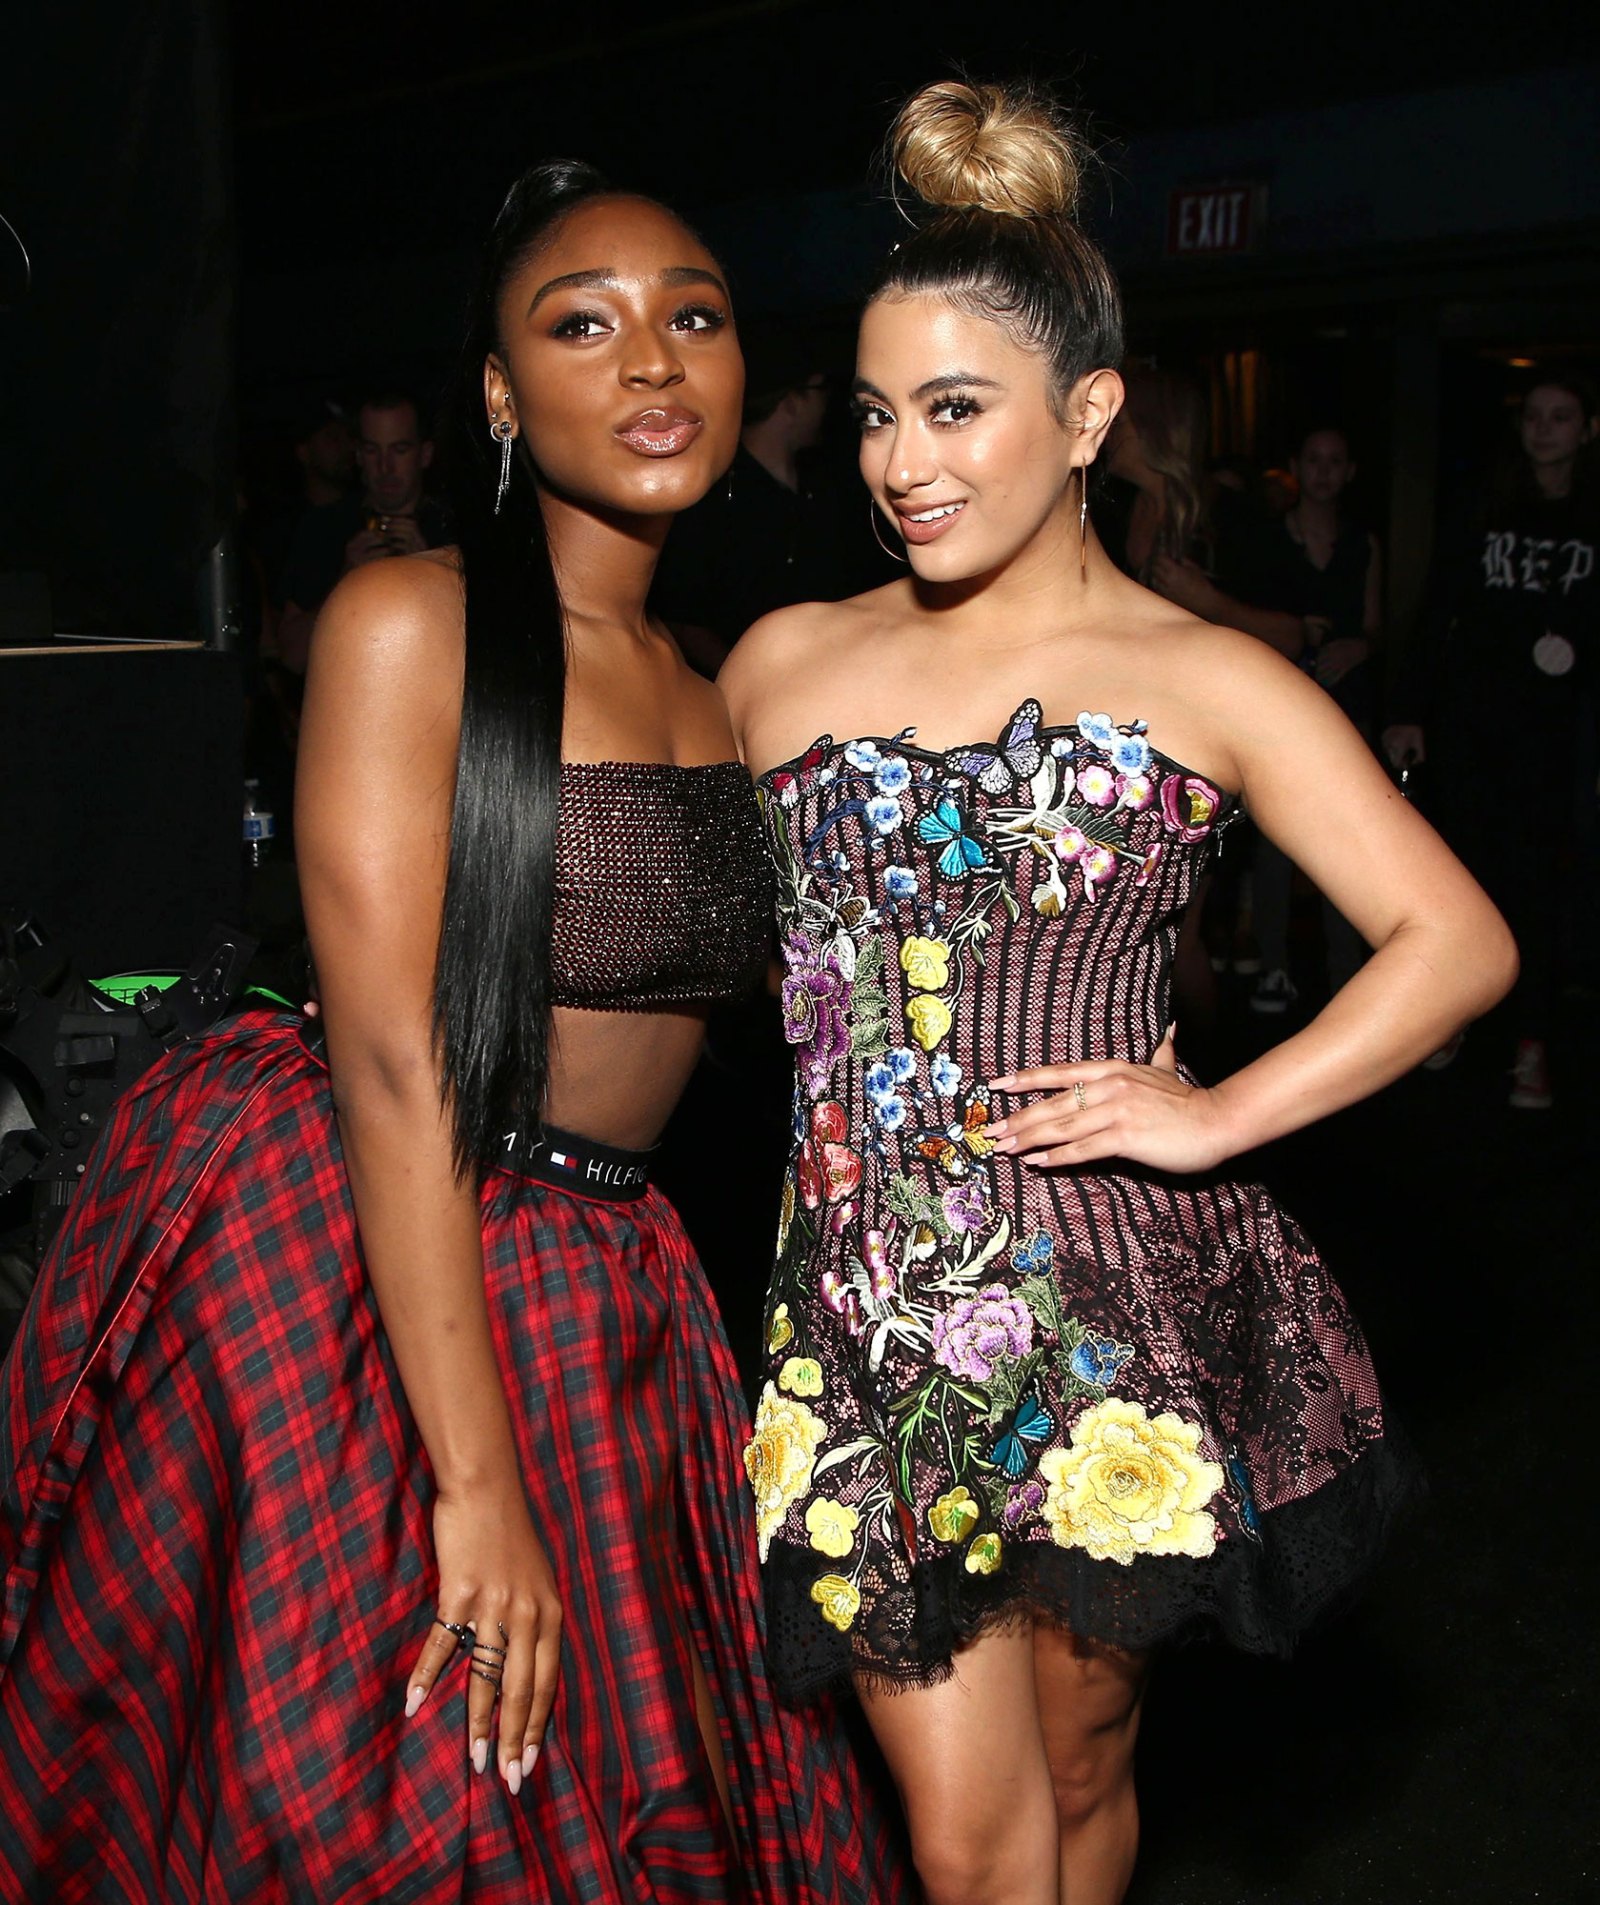 Normani Kordei Ally Brooke DWTS Dancing With The Stars Contestants With Prior Dancing Experience